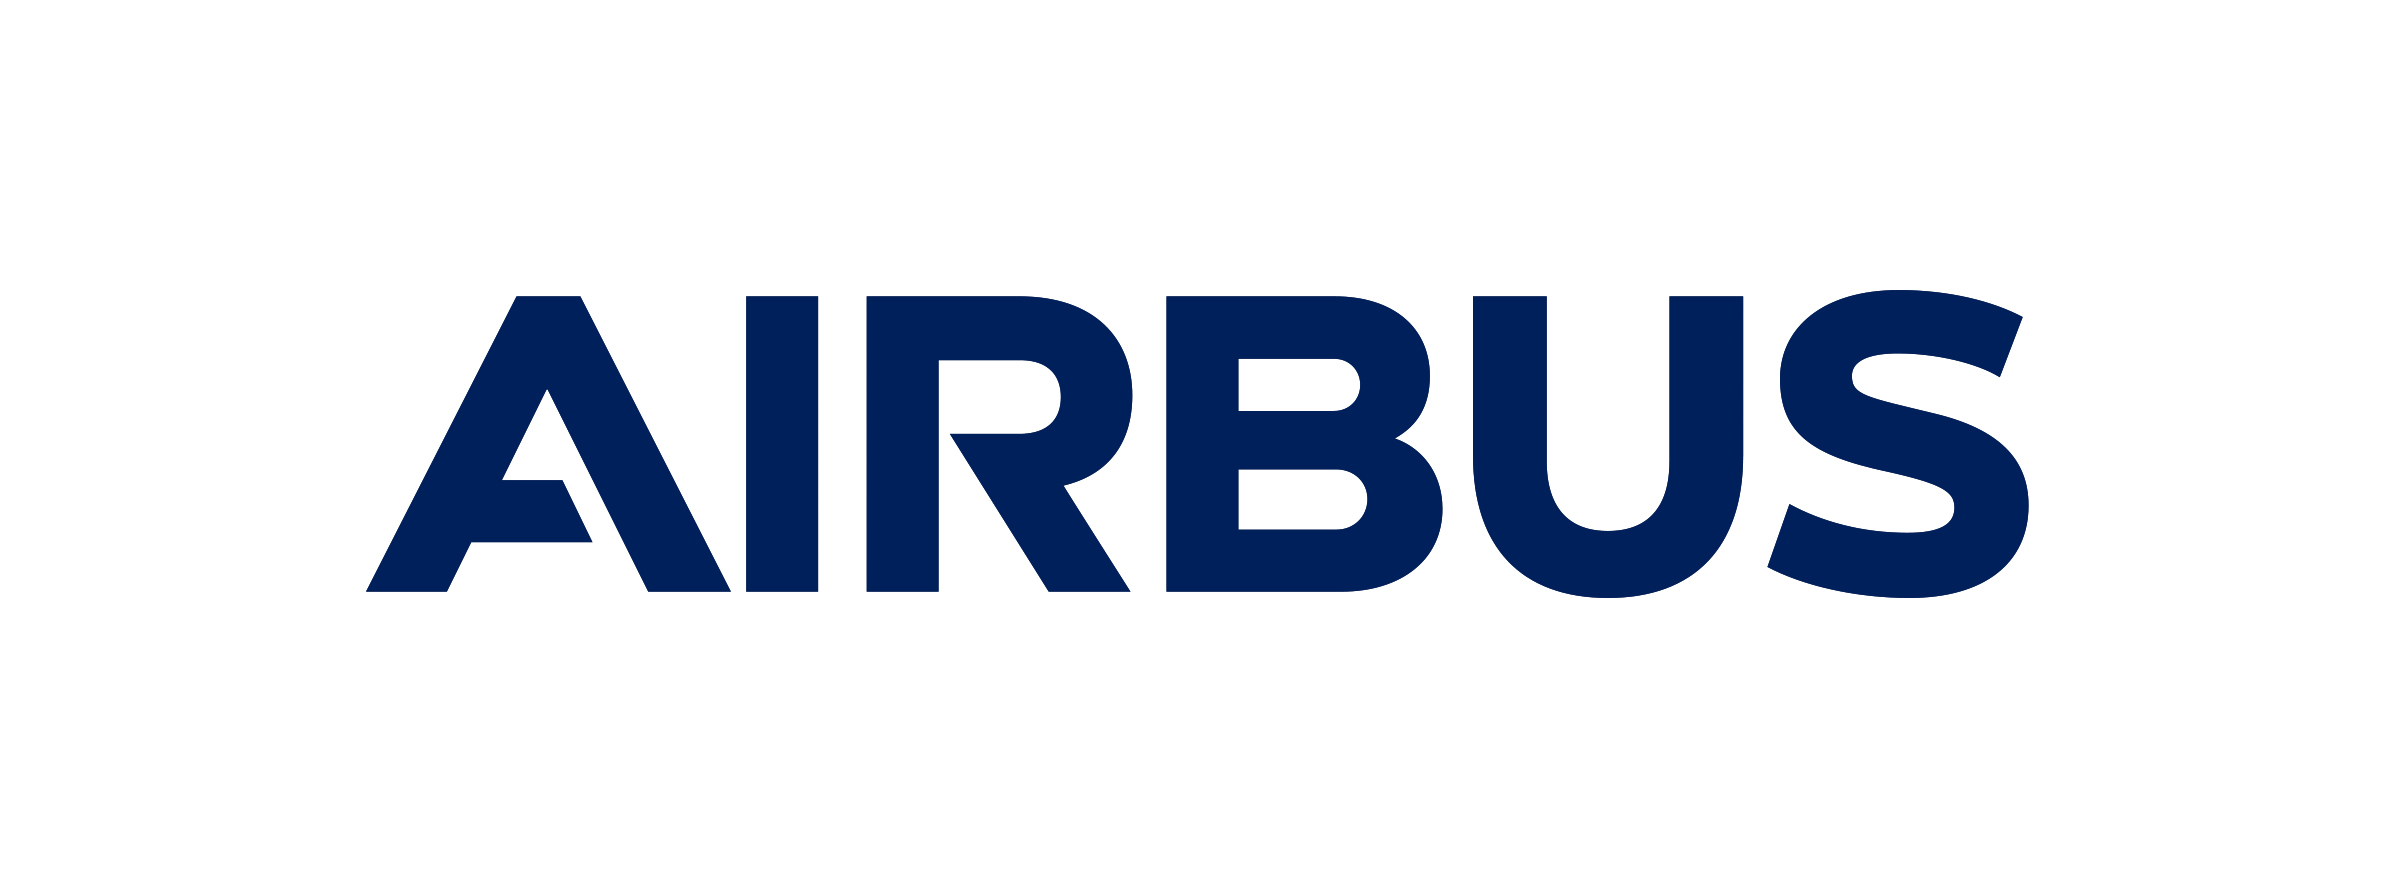 Airbus Work Experience 2020